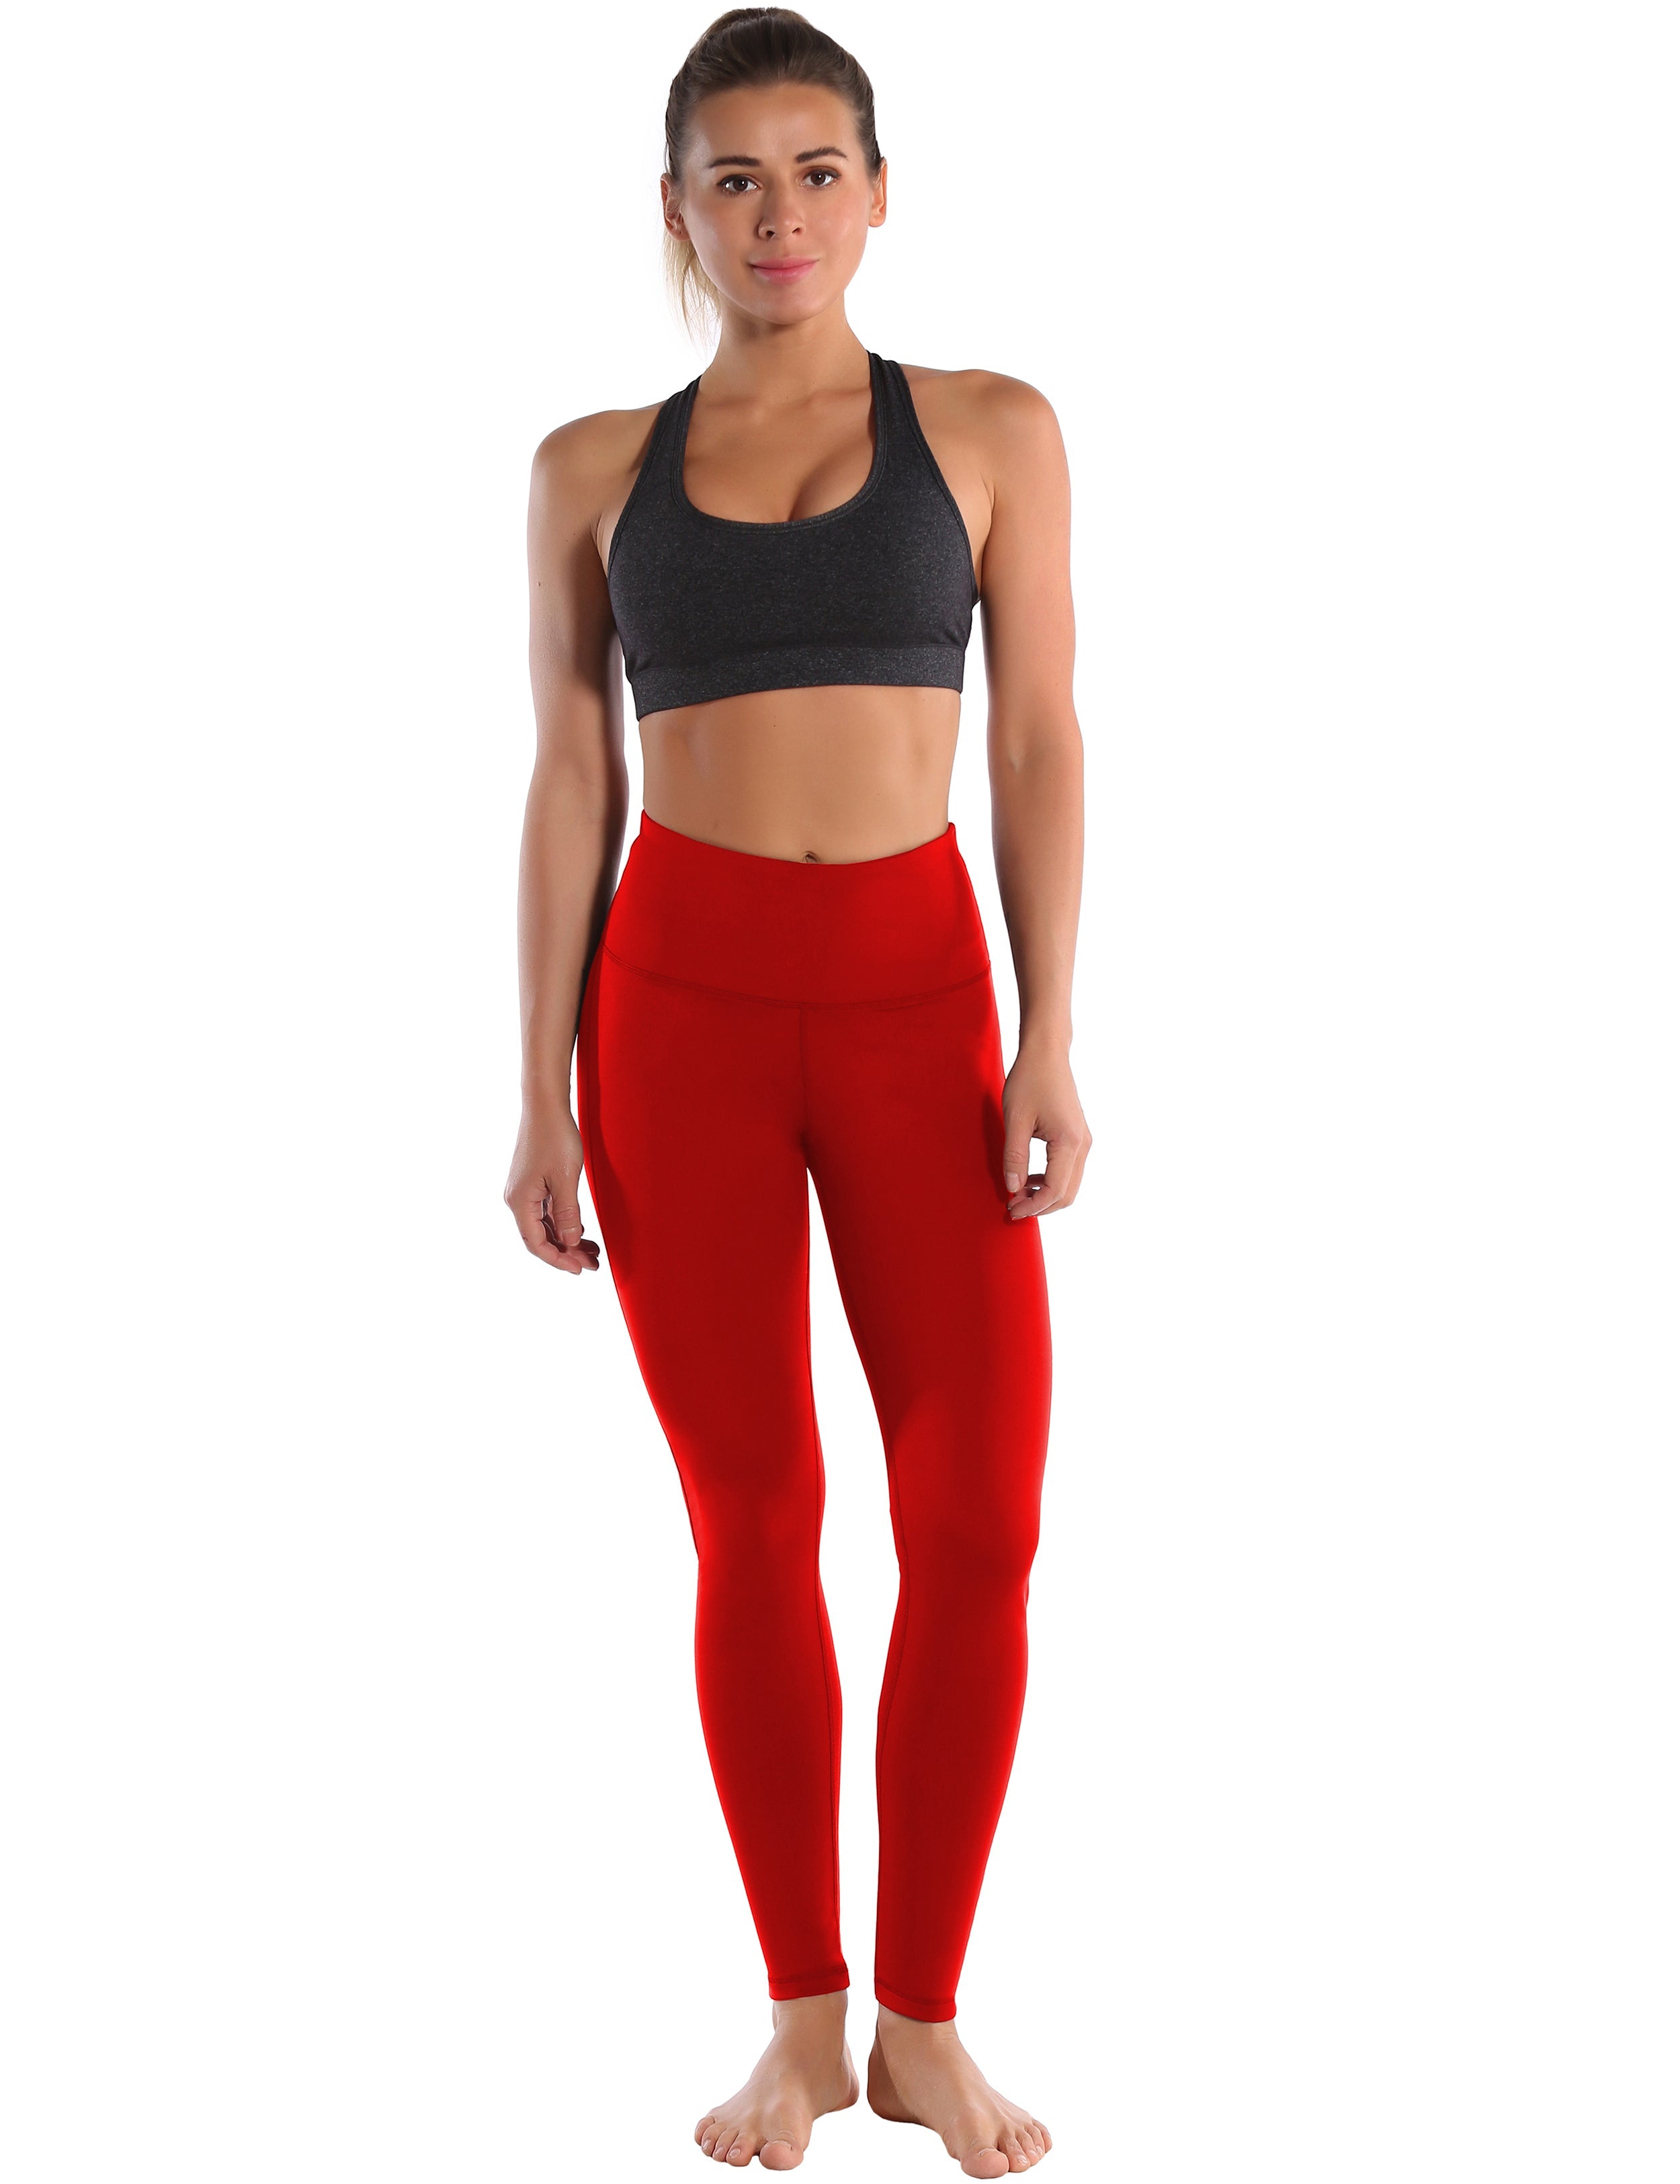 High Waist Side Line Pilates Pants scarlet Side Line is Make Your Legs Look Longer and Thinner 75%Nylon/25%Spandex Fabric doesn't attract lint easily 4-way stretch No see-through Moisture-wicking Tummy control Inner pocket Two lengths